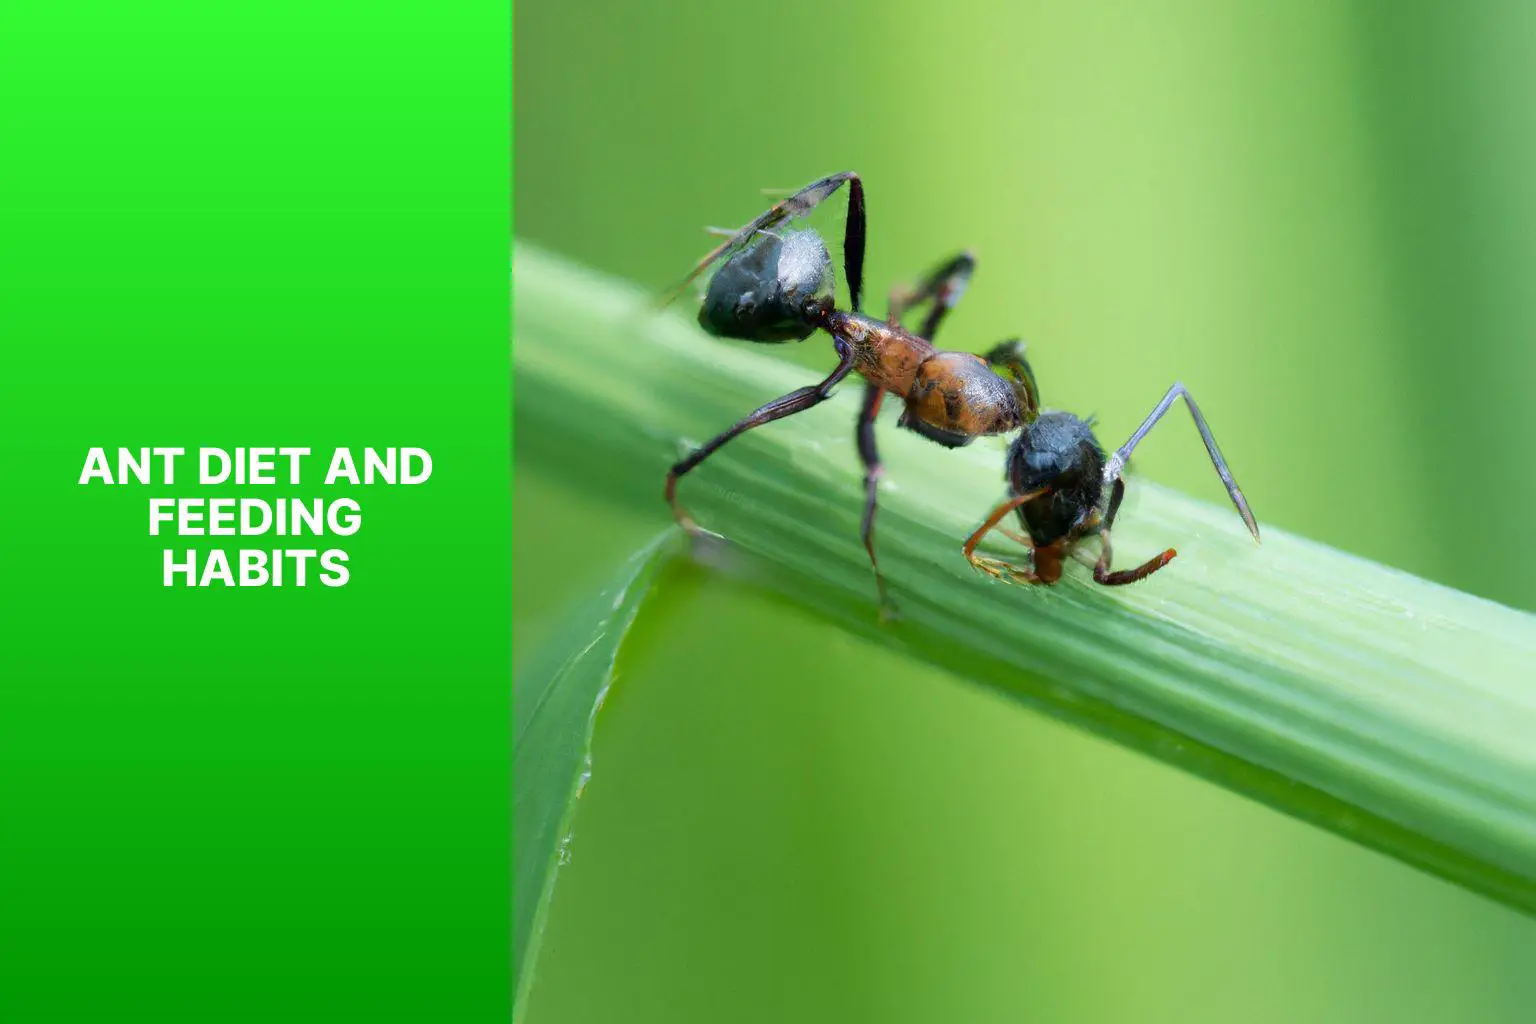 Ant Diet and Feeding Habits - Do Ants Eat Grass Seeds? 